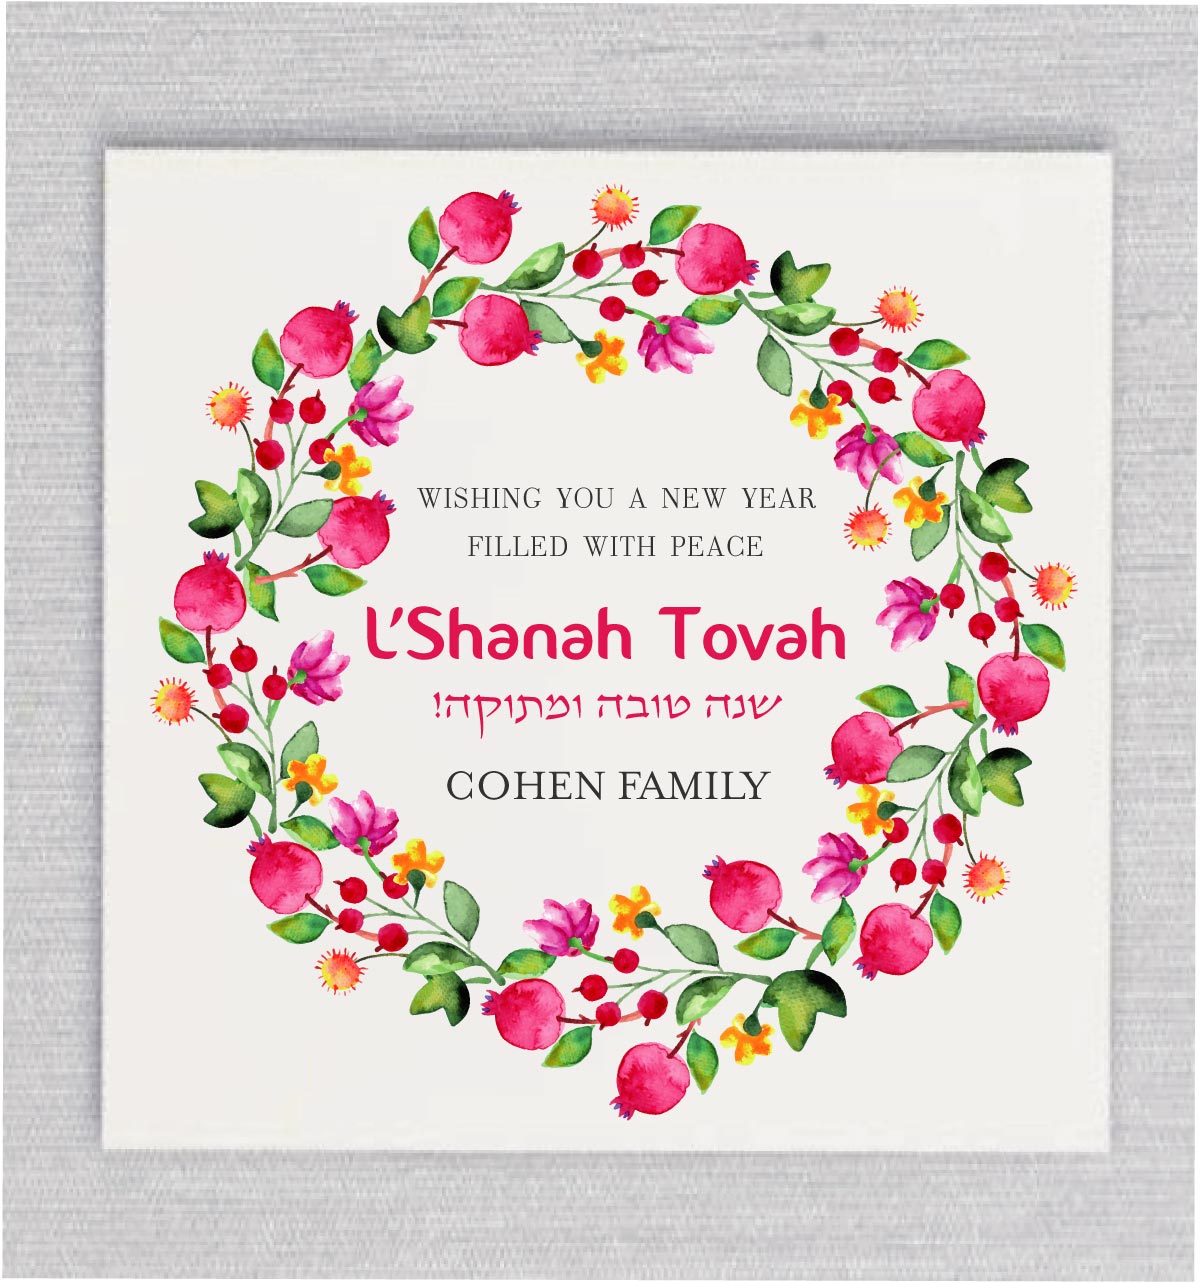 This Jewish New Year in style with our beautifully crafted cards featuring a vibrant watercolor pomegranate wreath design. The intricate details and vivid watercolor create an eye-catching display, symbolizing abundance and good fortune for the Jewish New Year ahead.